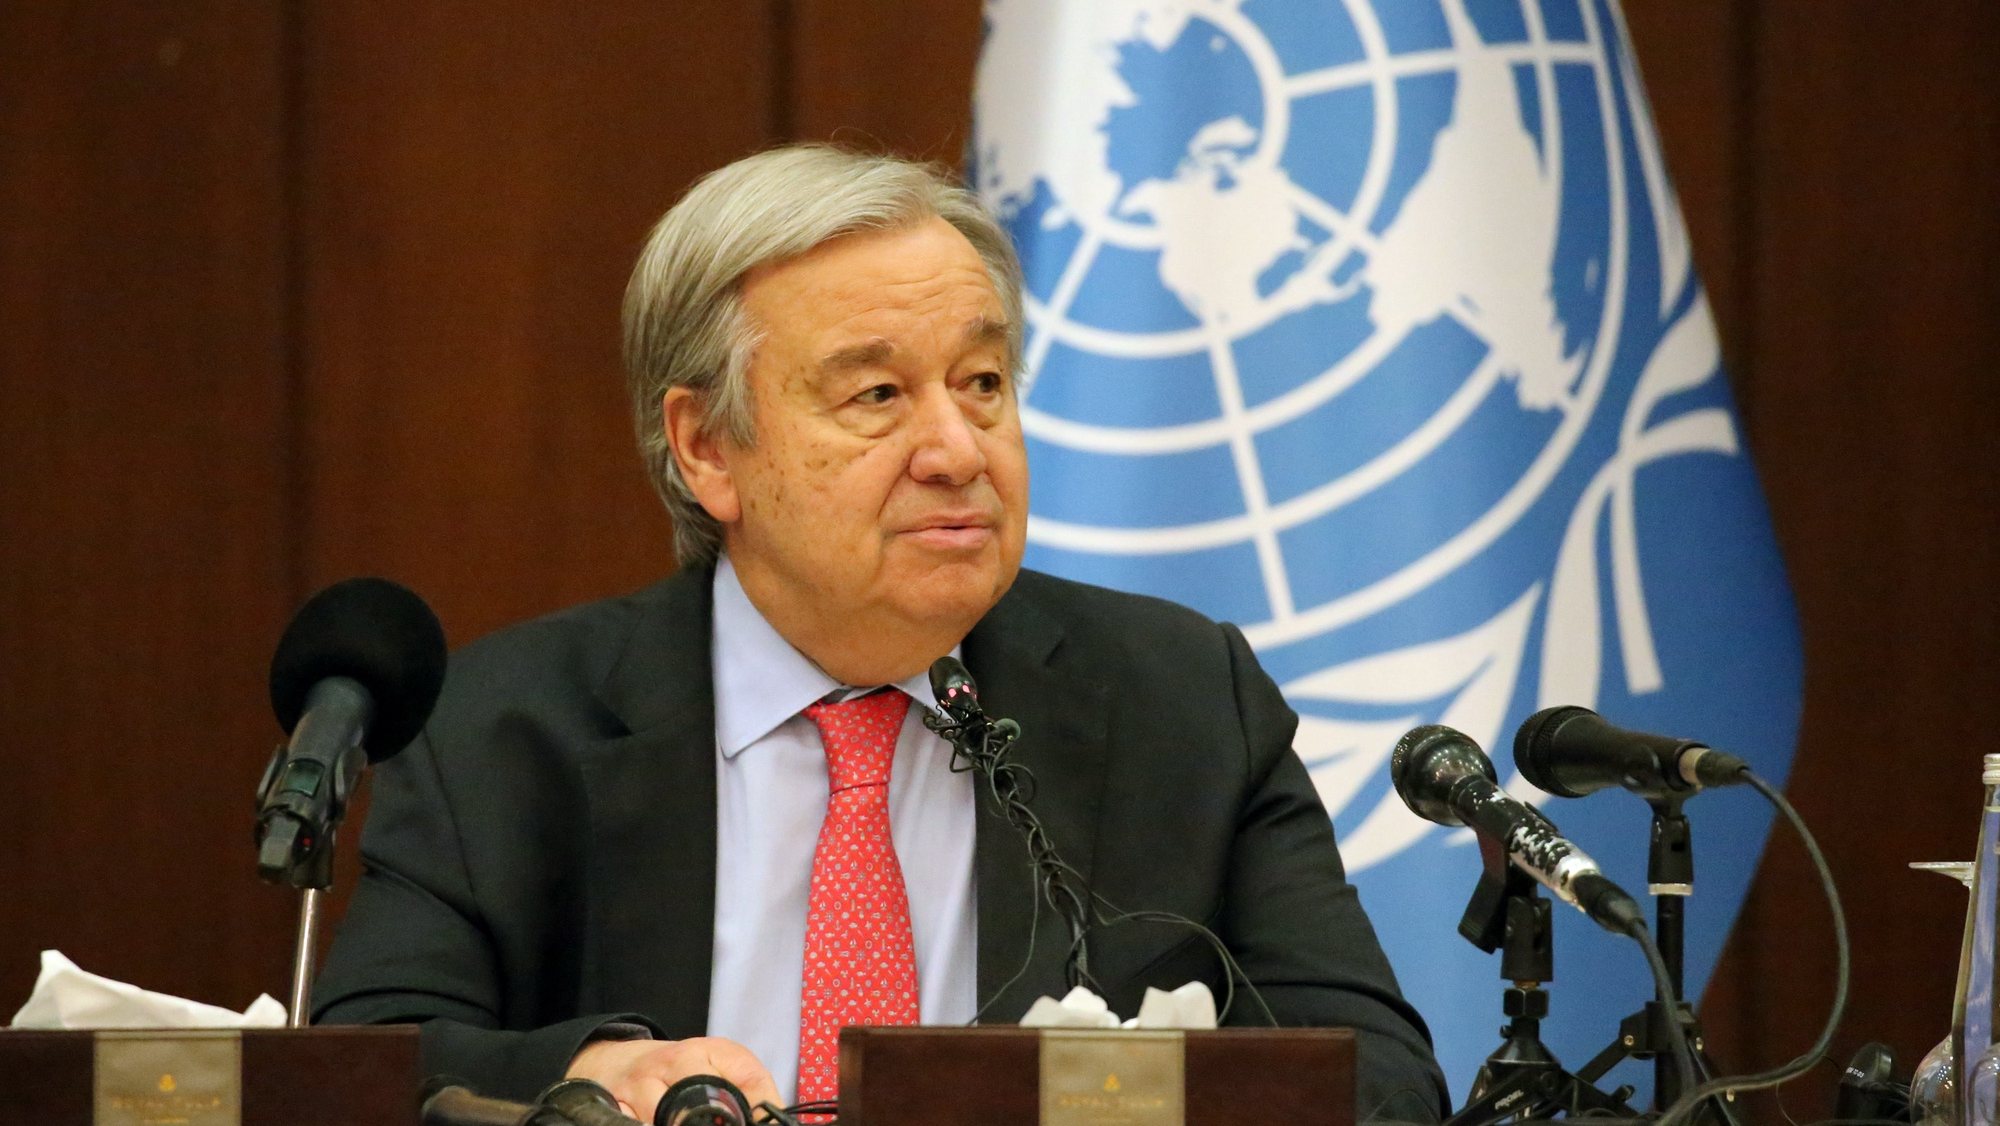 epa10497272 The Secretary-General of the United Nations, Antonio Guterres speaks during a press conference at the al-Rasheed hotel in Baghdad, Iraq, 01 March 2023. Antonio Guterres announced that his visit is to show solidarity and promote hope for a better future for Iraq.  EPA/AHMED JALIL